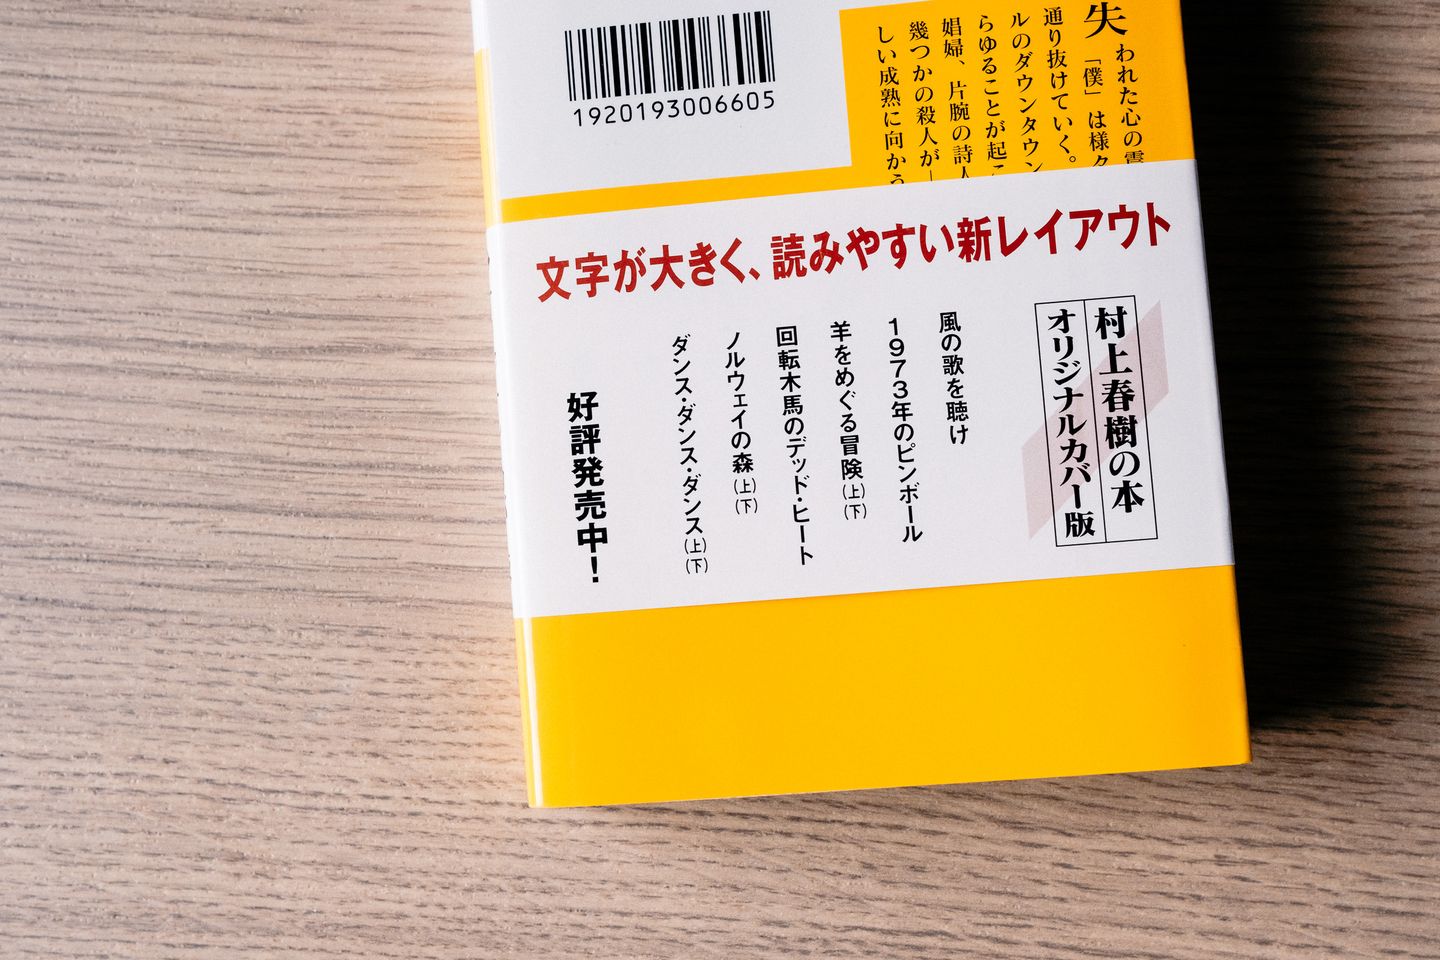 Japanese book with a printed paper band